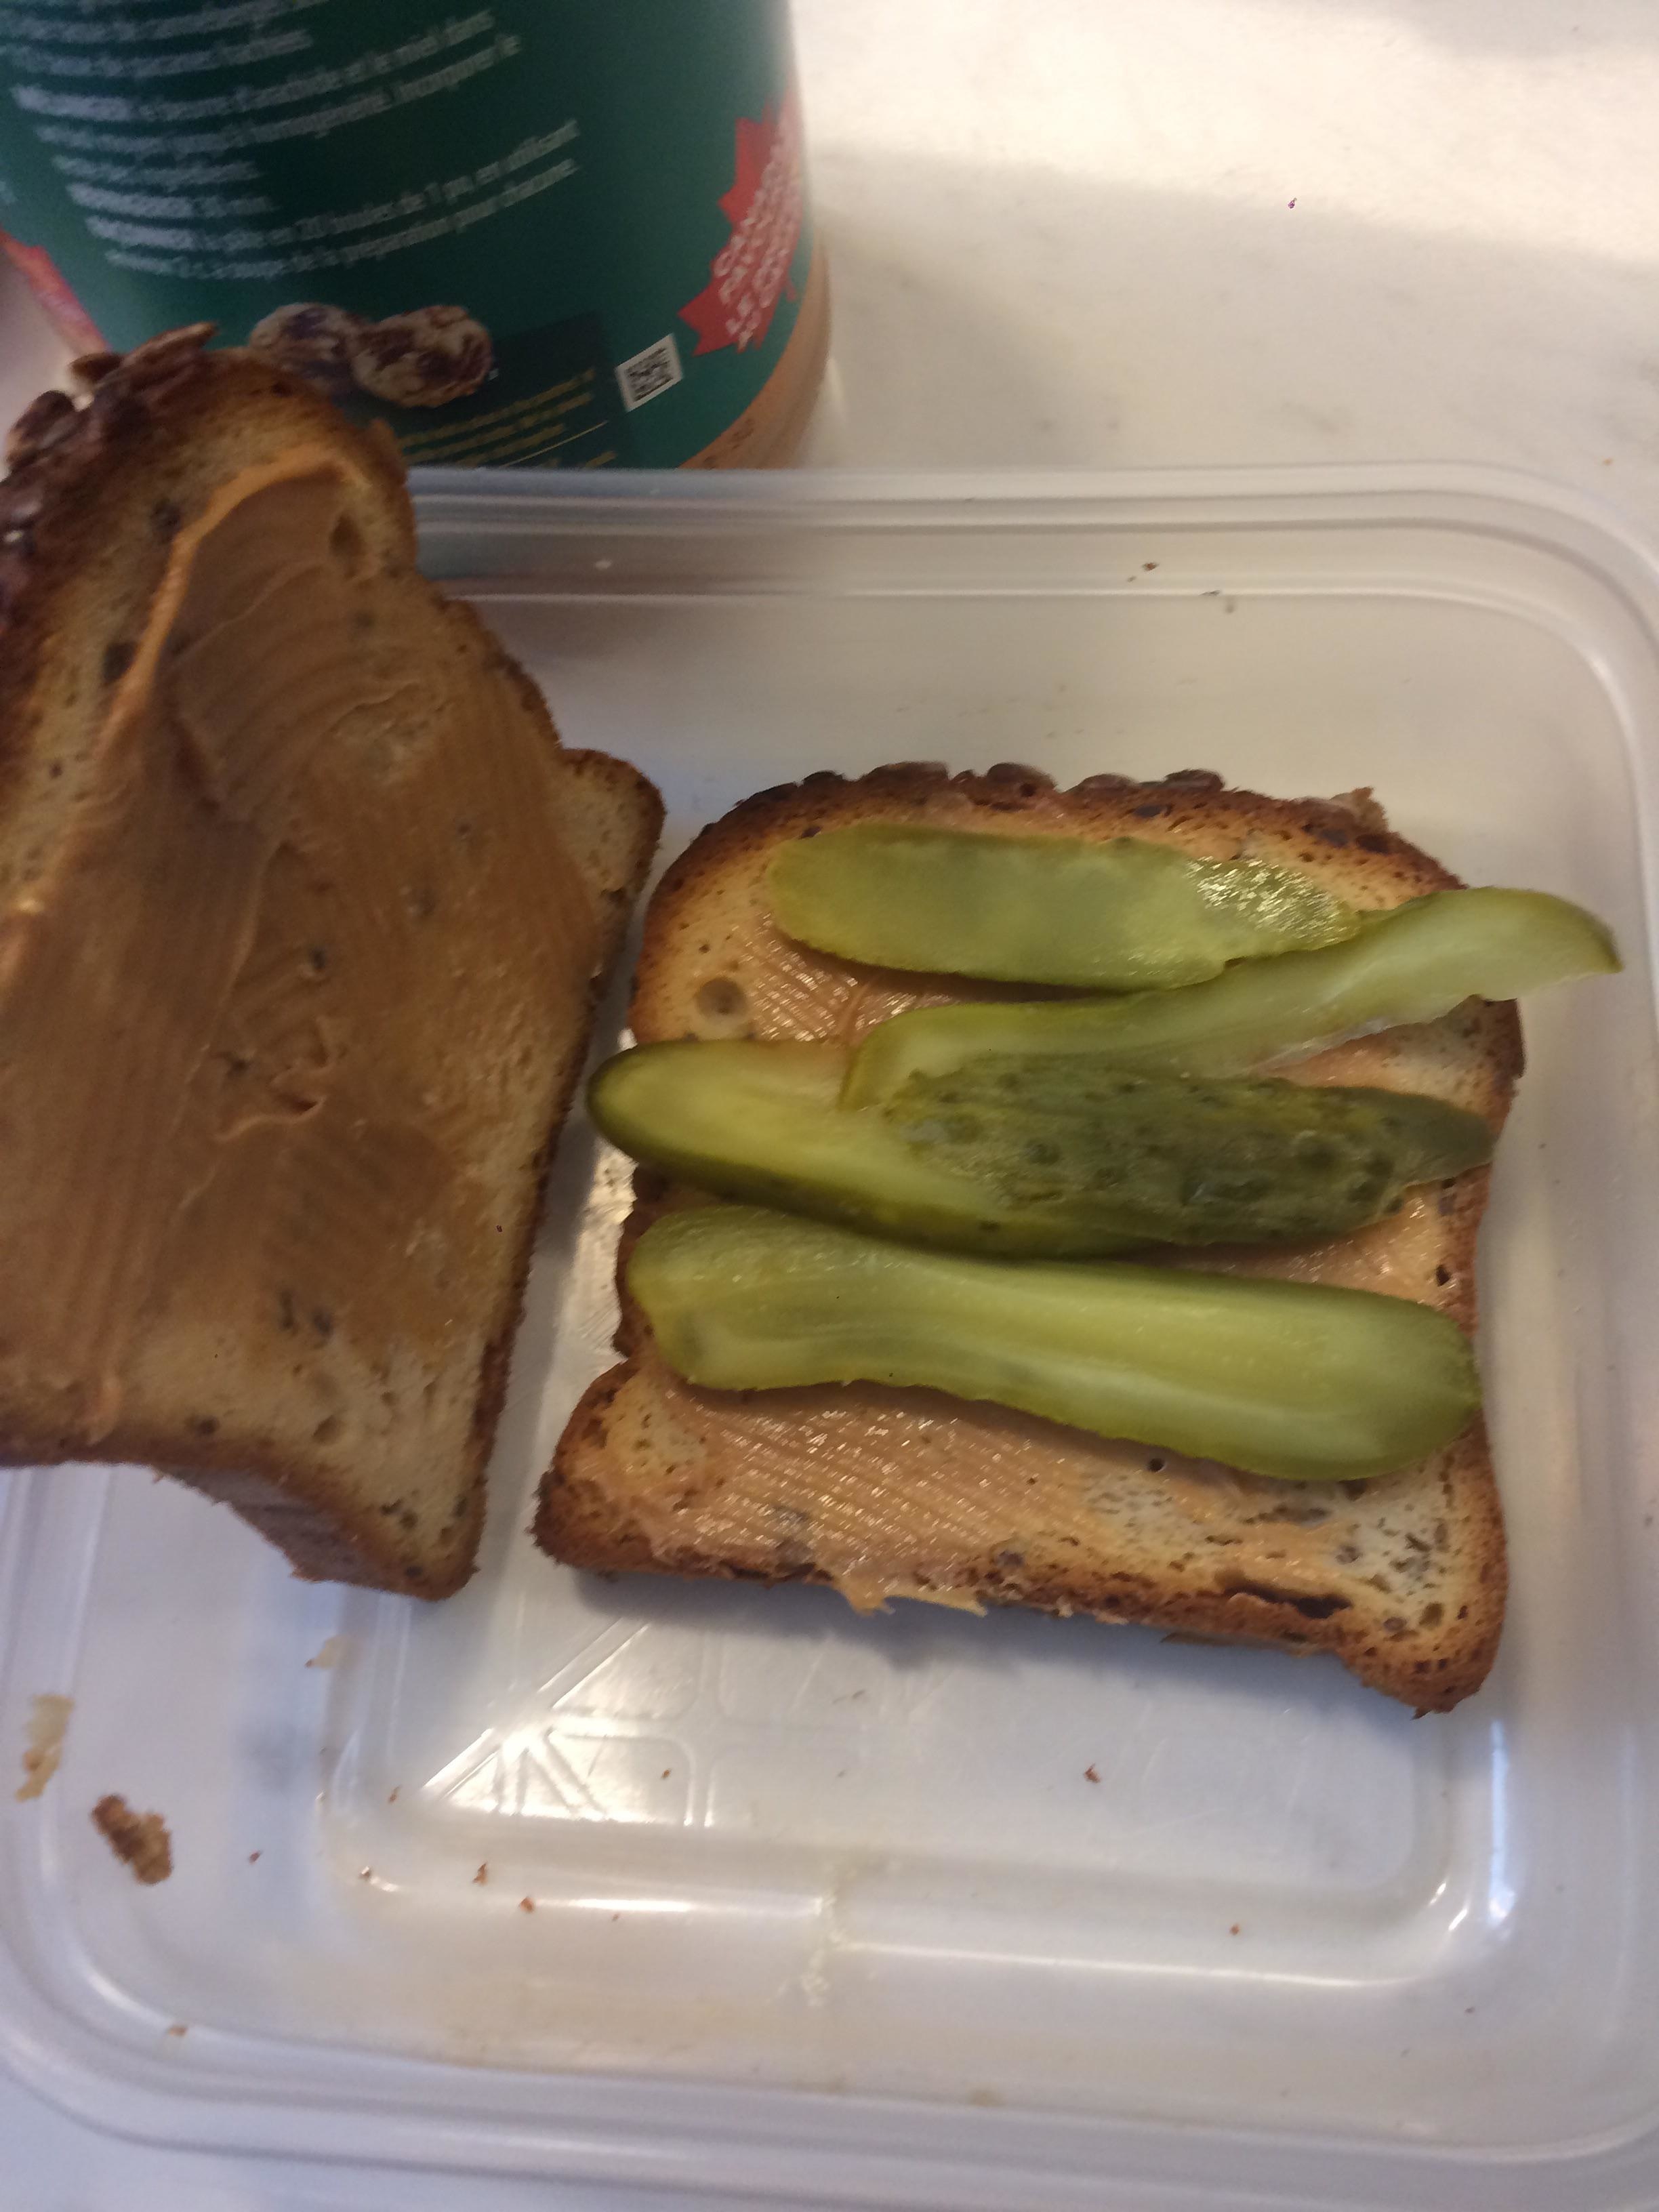 Peanut butter and pickle sandwich.